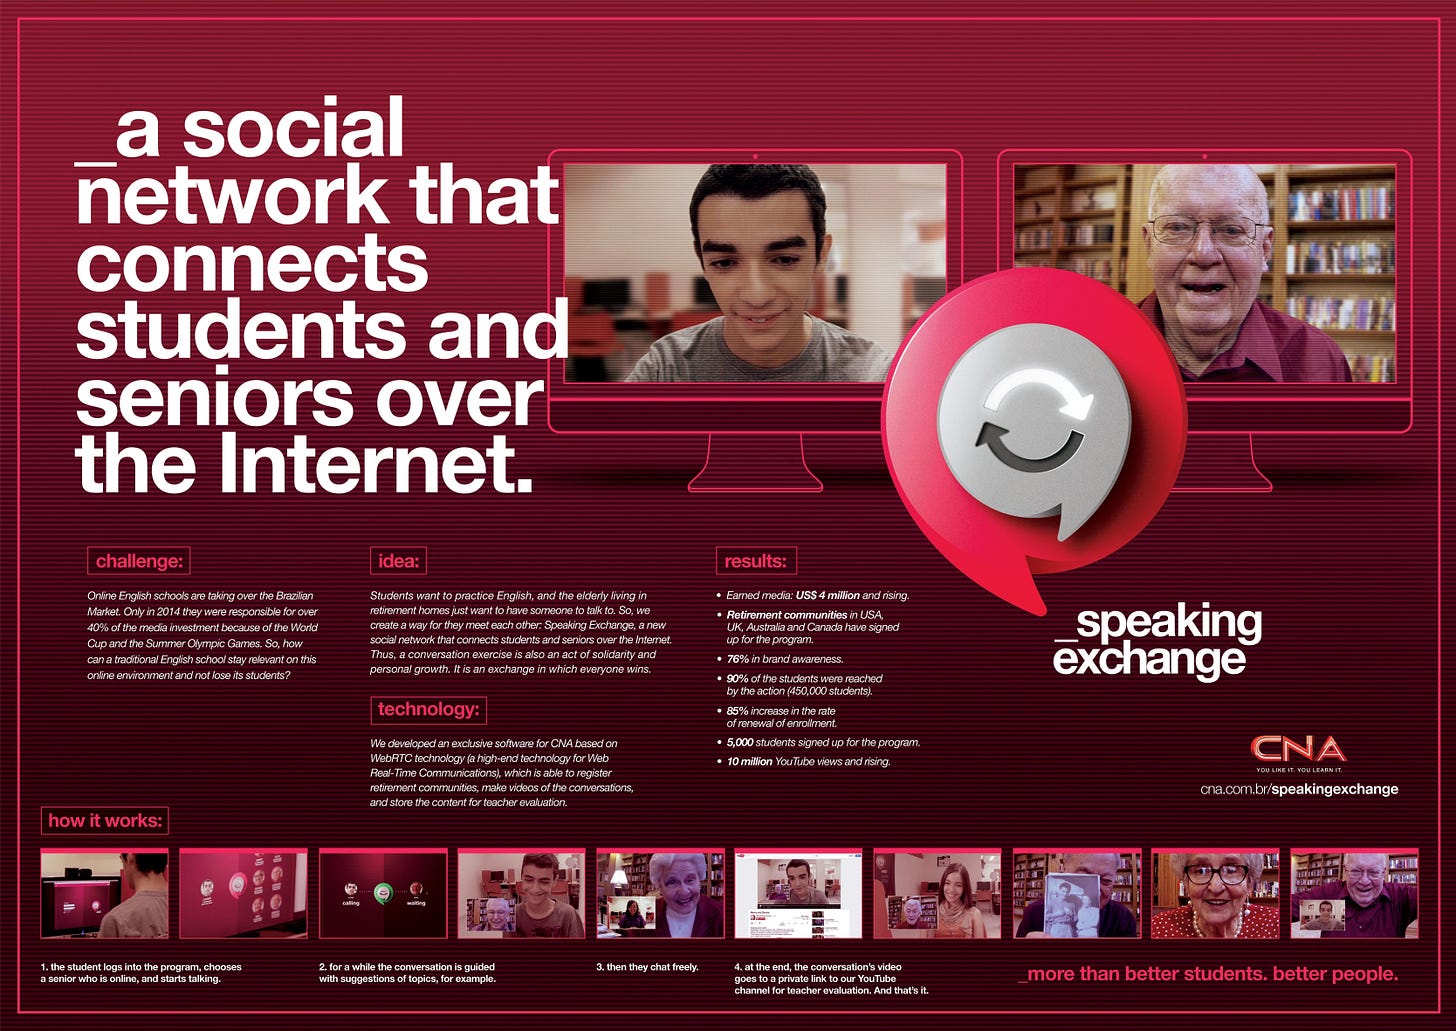 A screenshot of the Speaking Exchange web site, with an image of a student and older adult on separate monitors, and the words "a social network that connects students and seniors over the internet," along with other stats and images